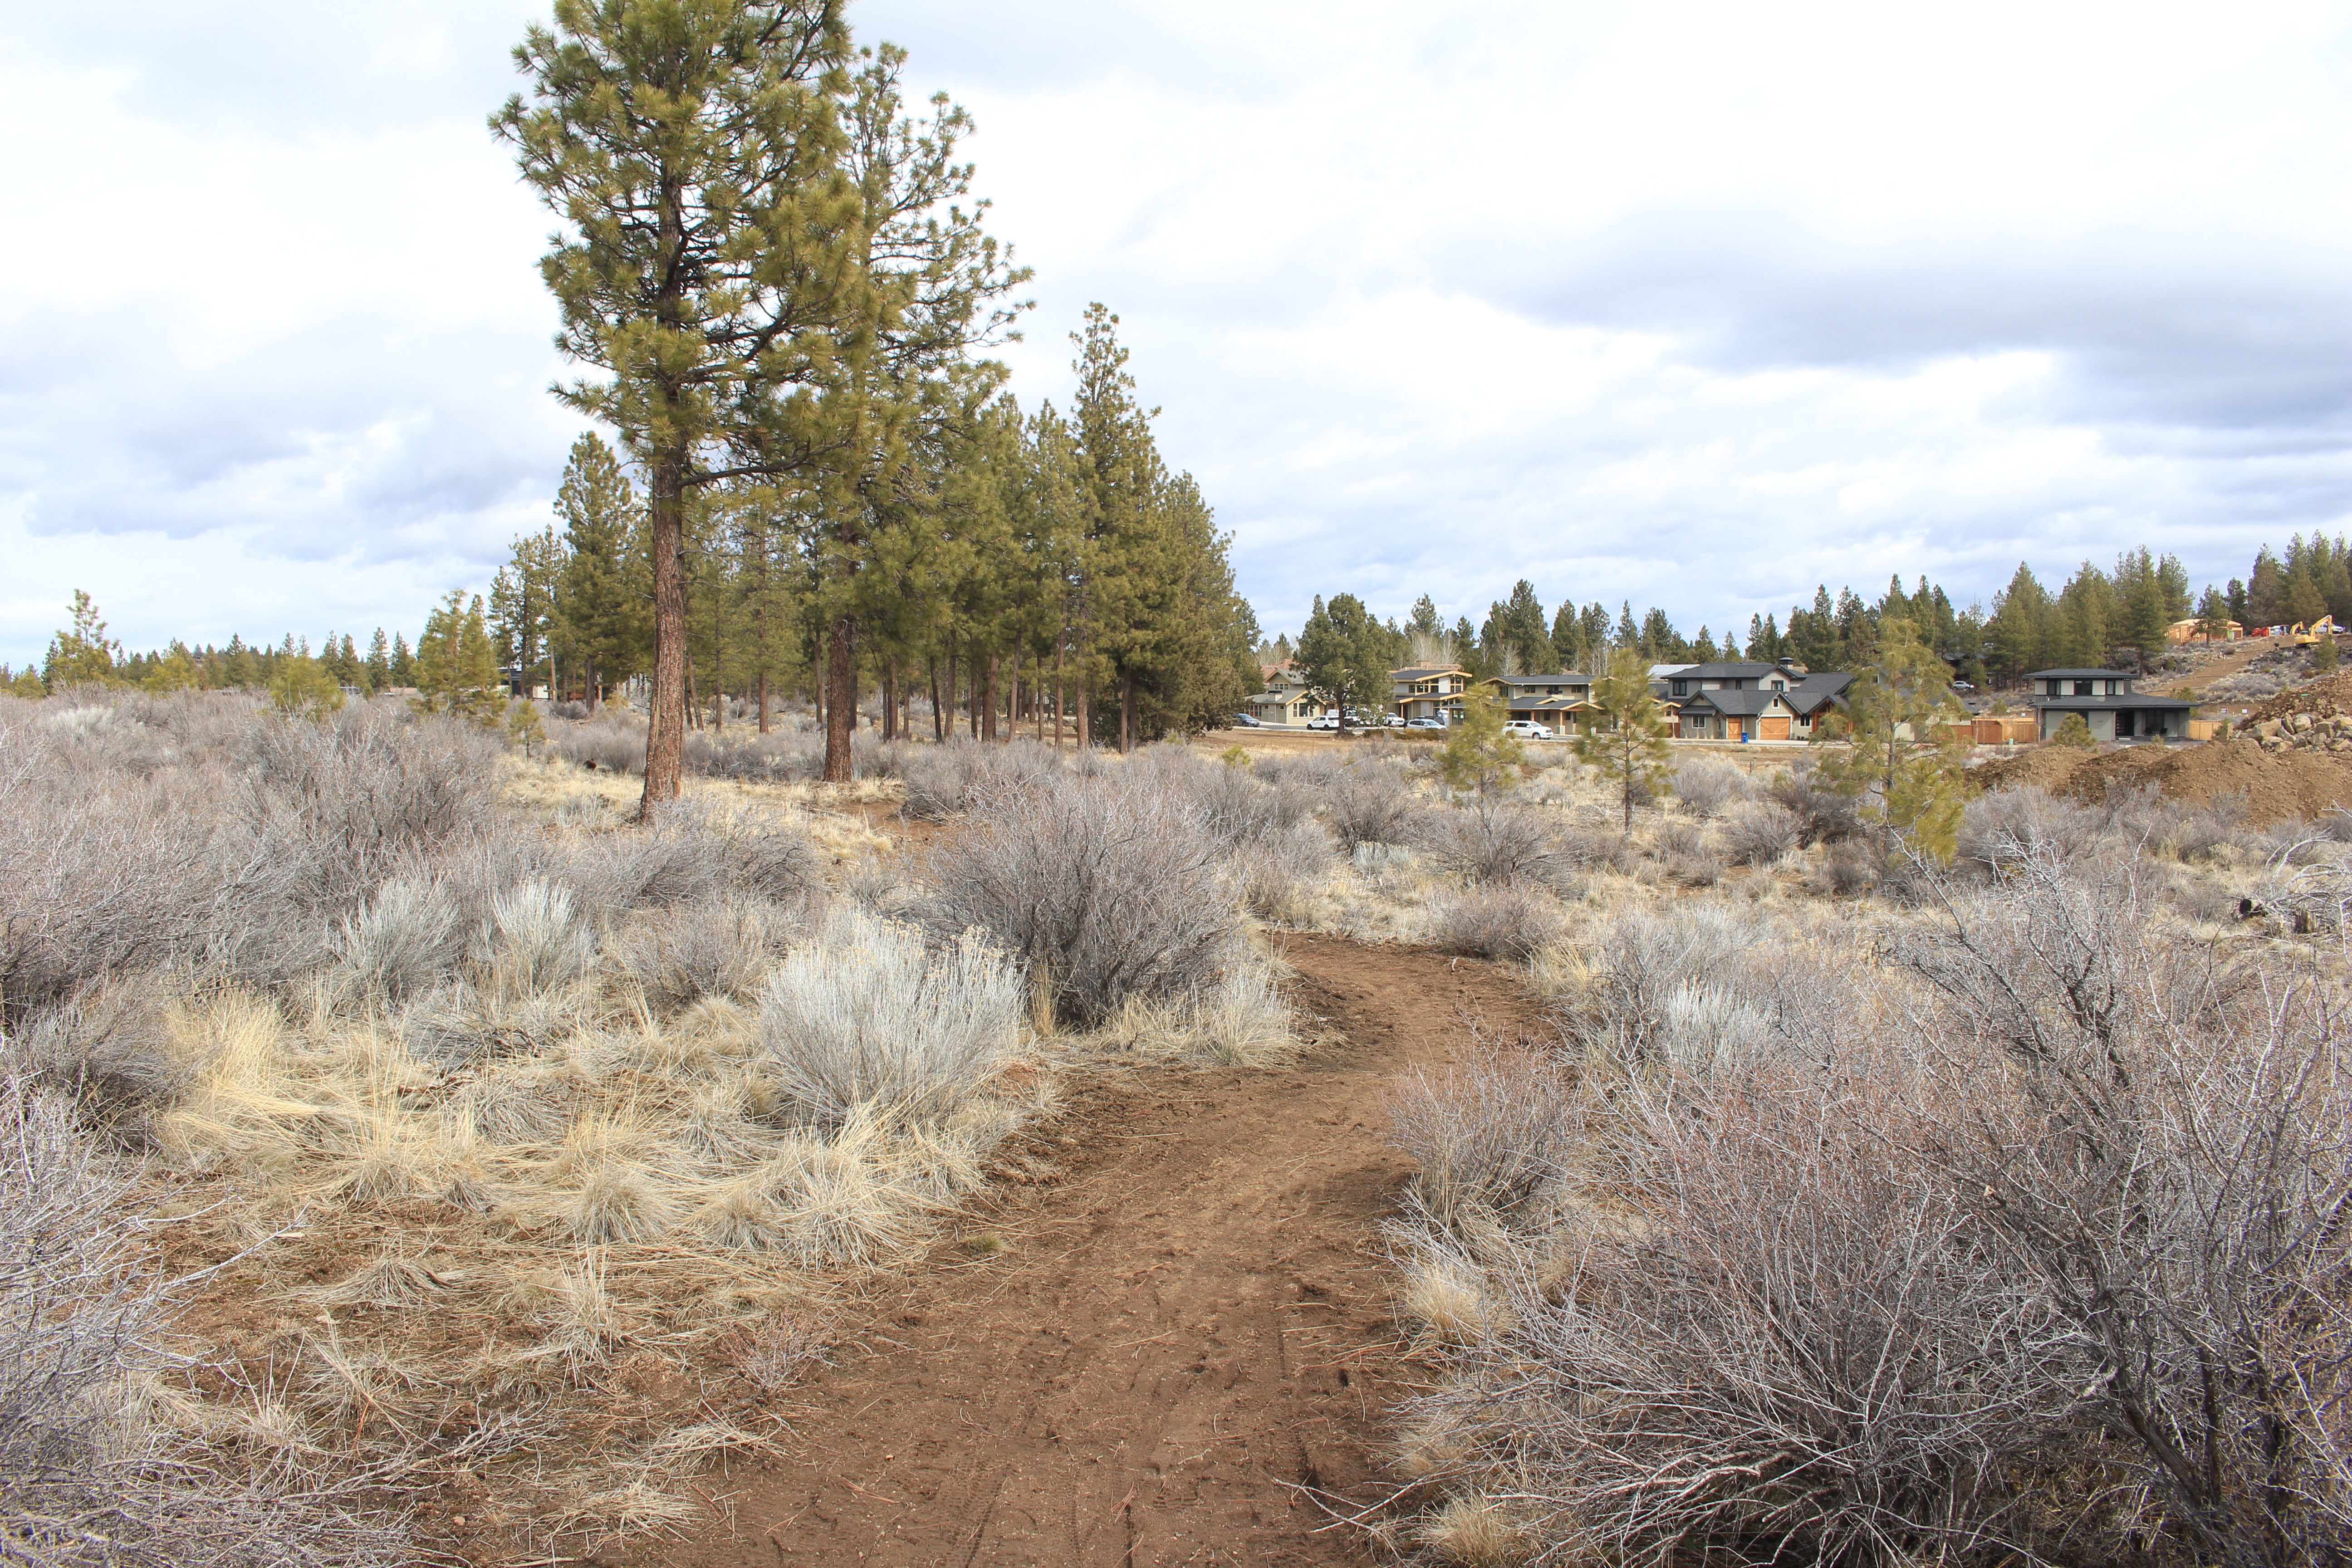 Trail leading to the new Shevlin West park site